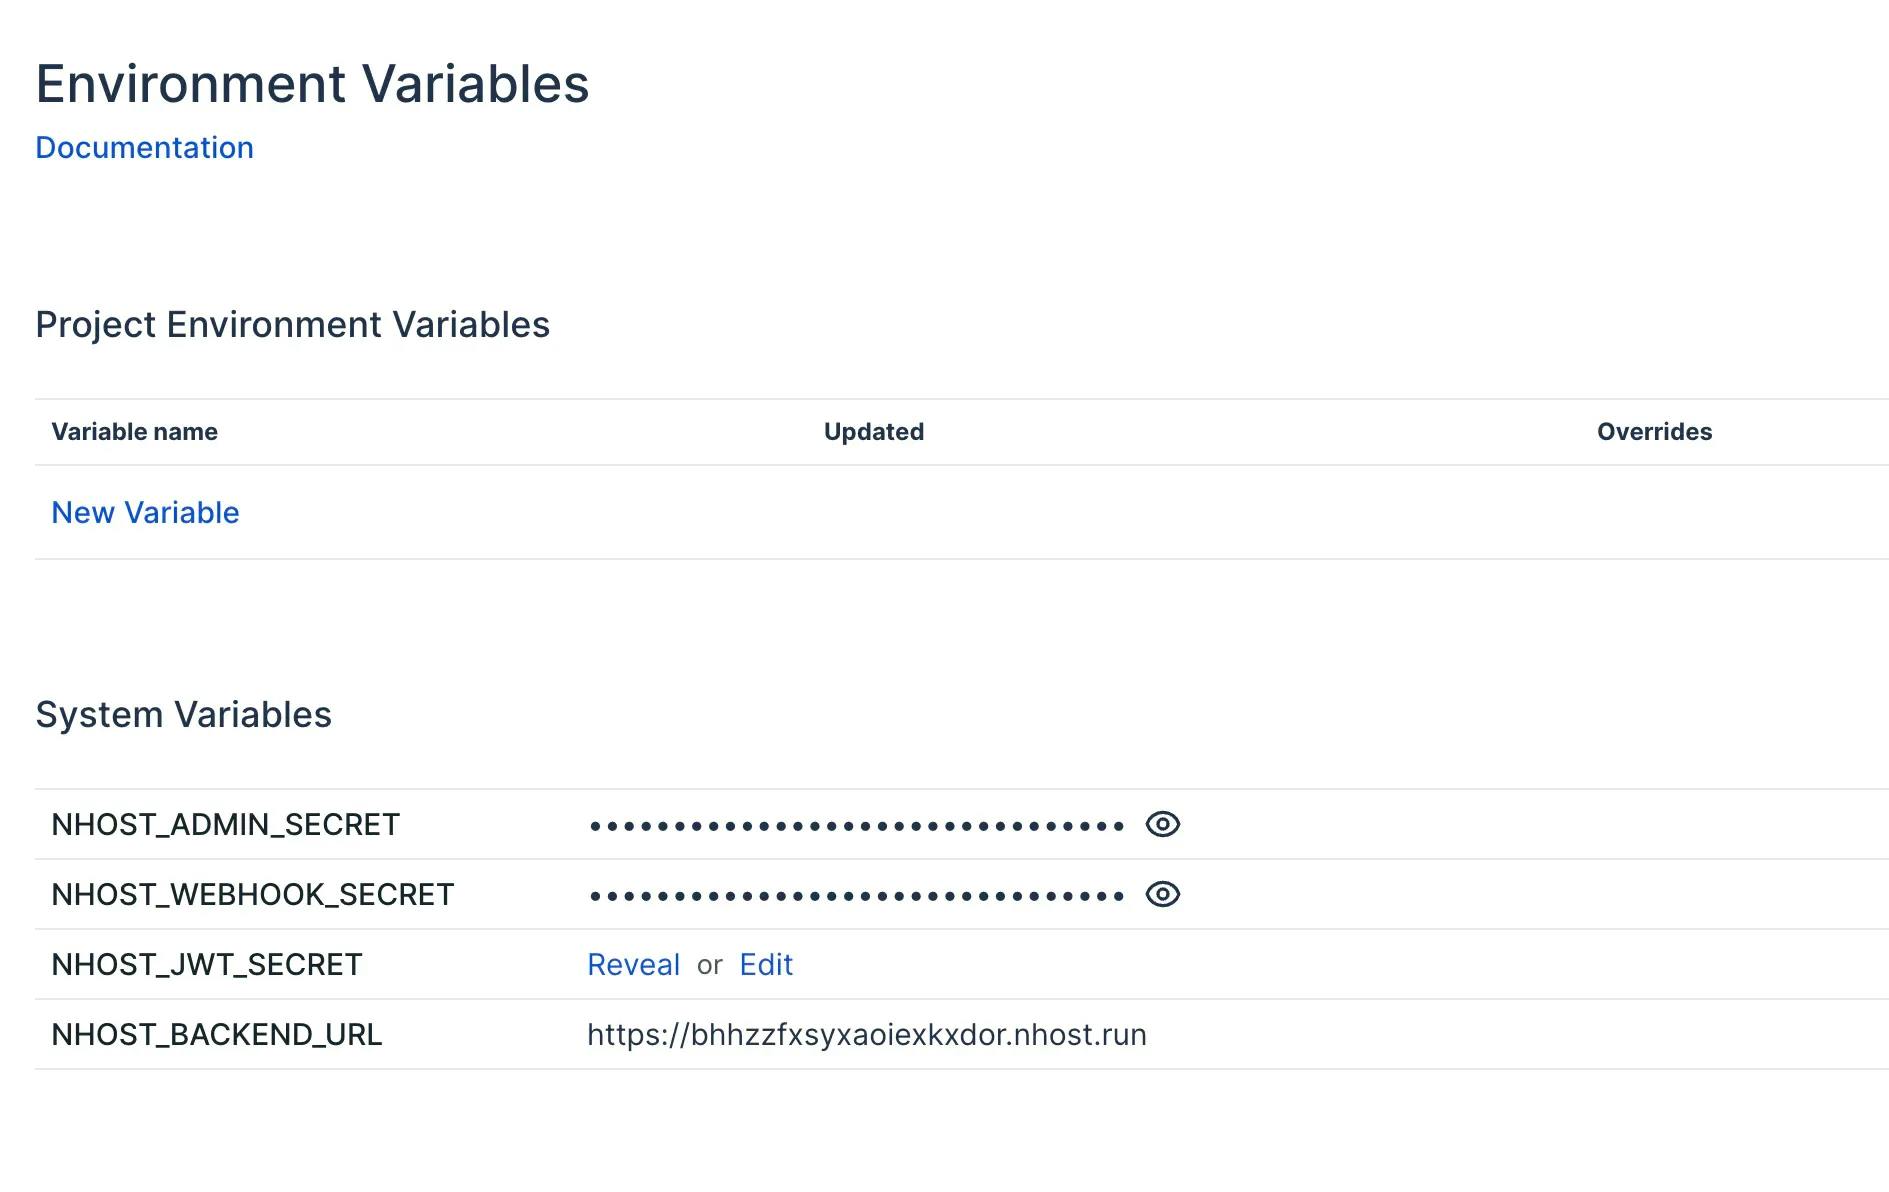 The Environment variables page in the Nhost dashboard.